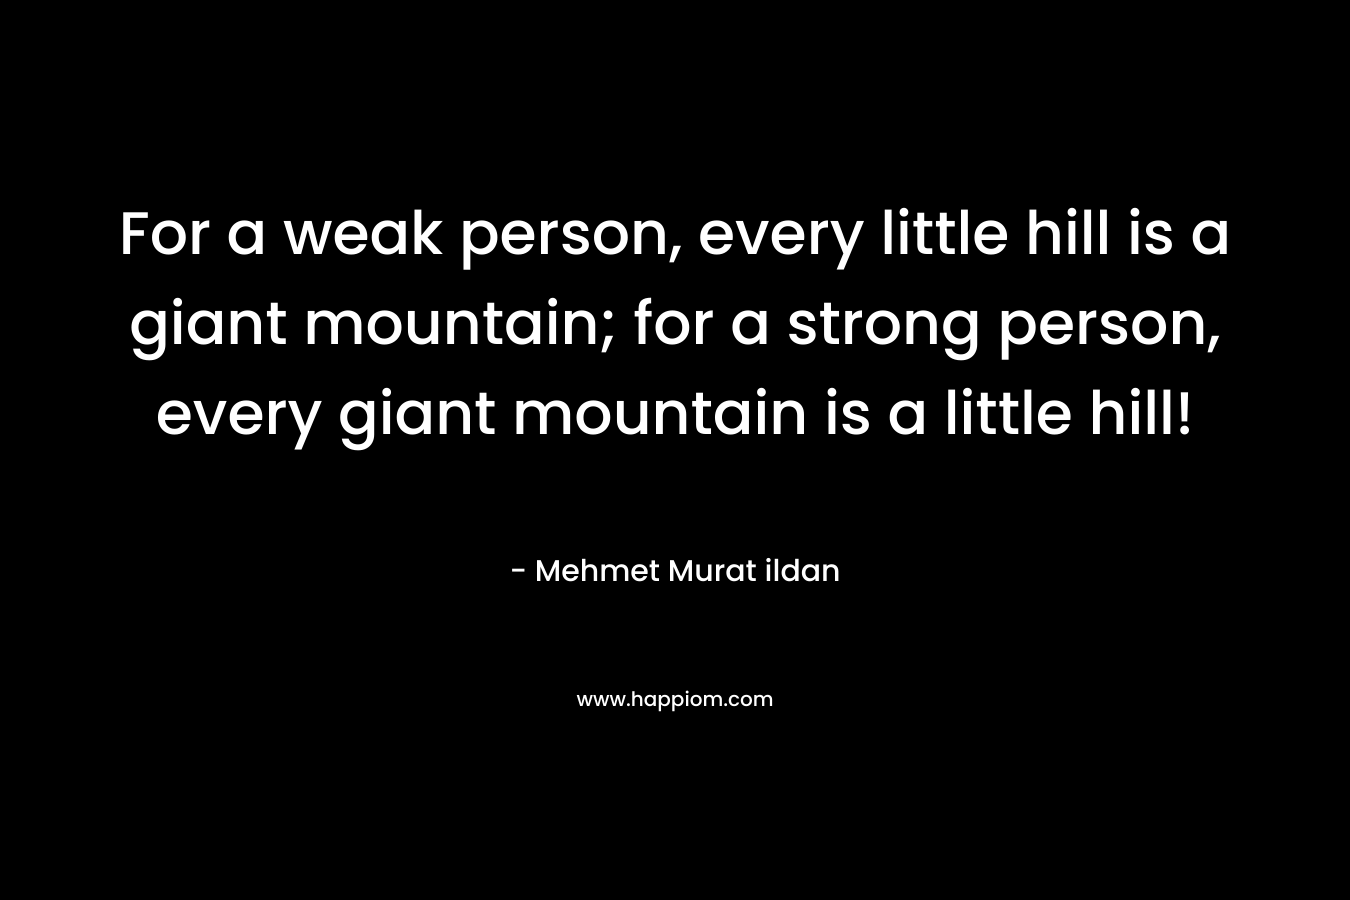 For a weak person, every little hill is a giant mountain; for a strong person, every giant mountain is a little hill!